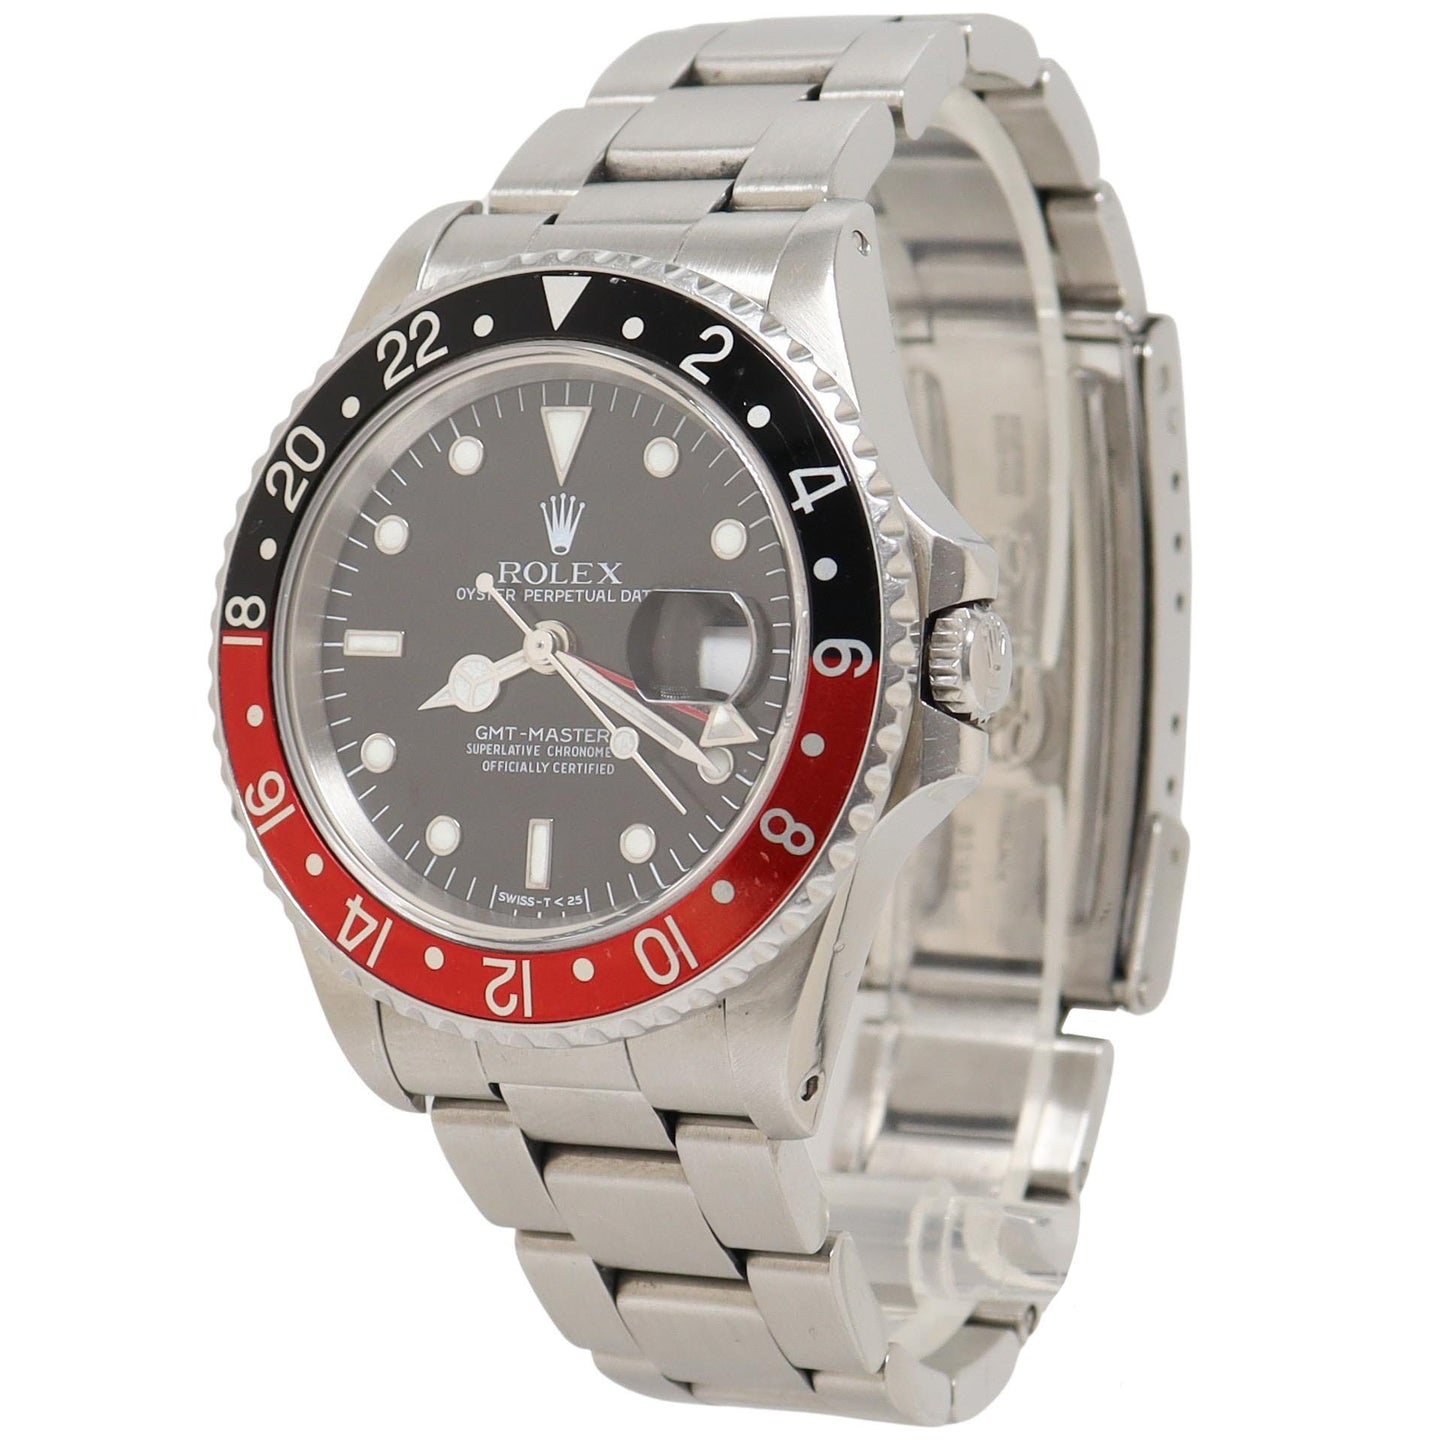 Rolex Gmt Master II Stainless Steel 40mm "Coke" Black Dot Dial Watch  Reference #: 16710